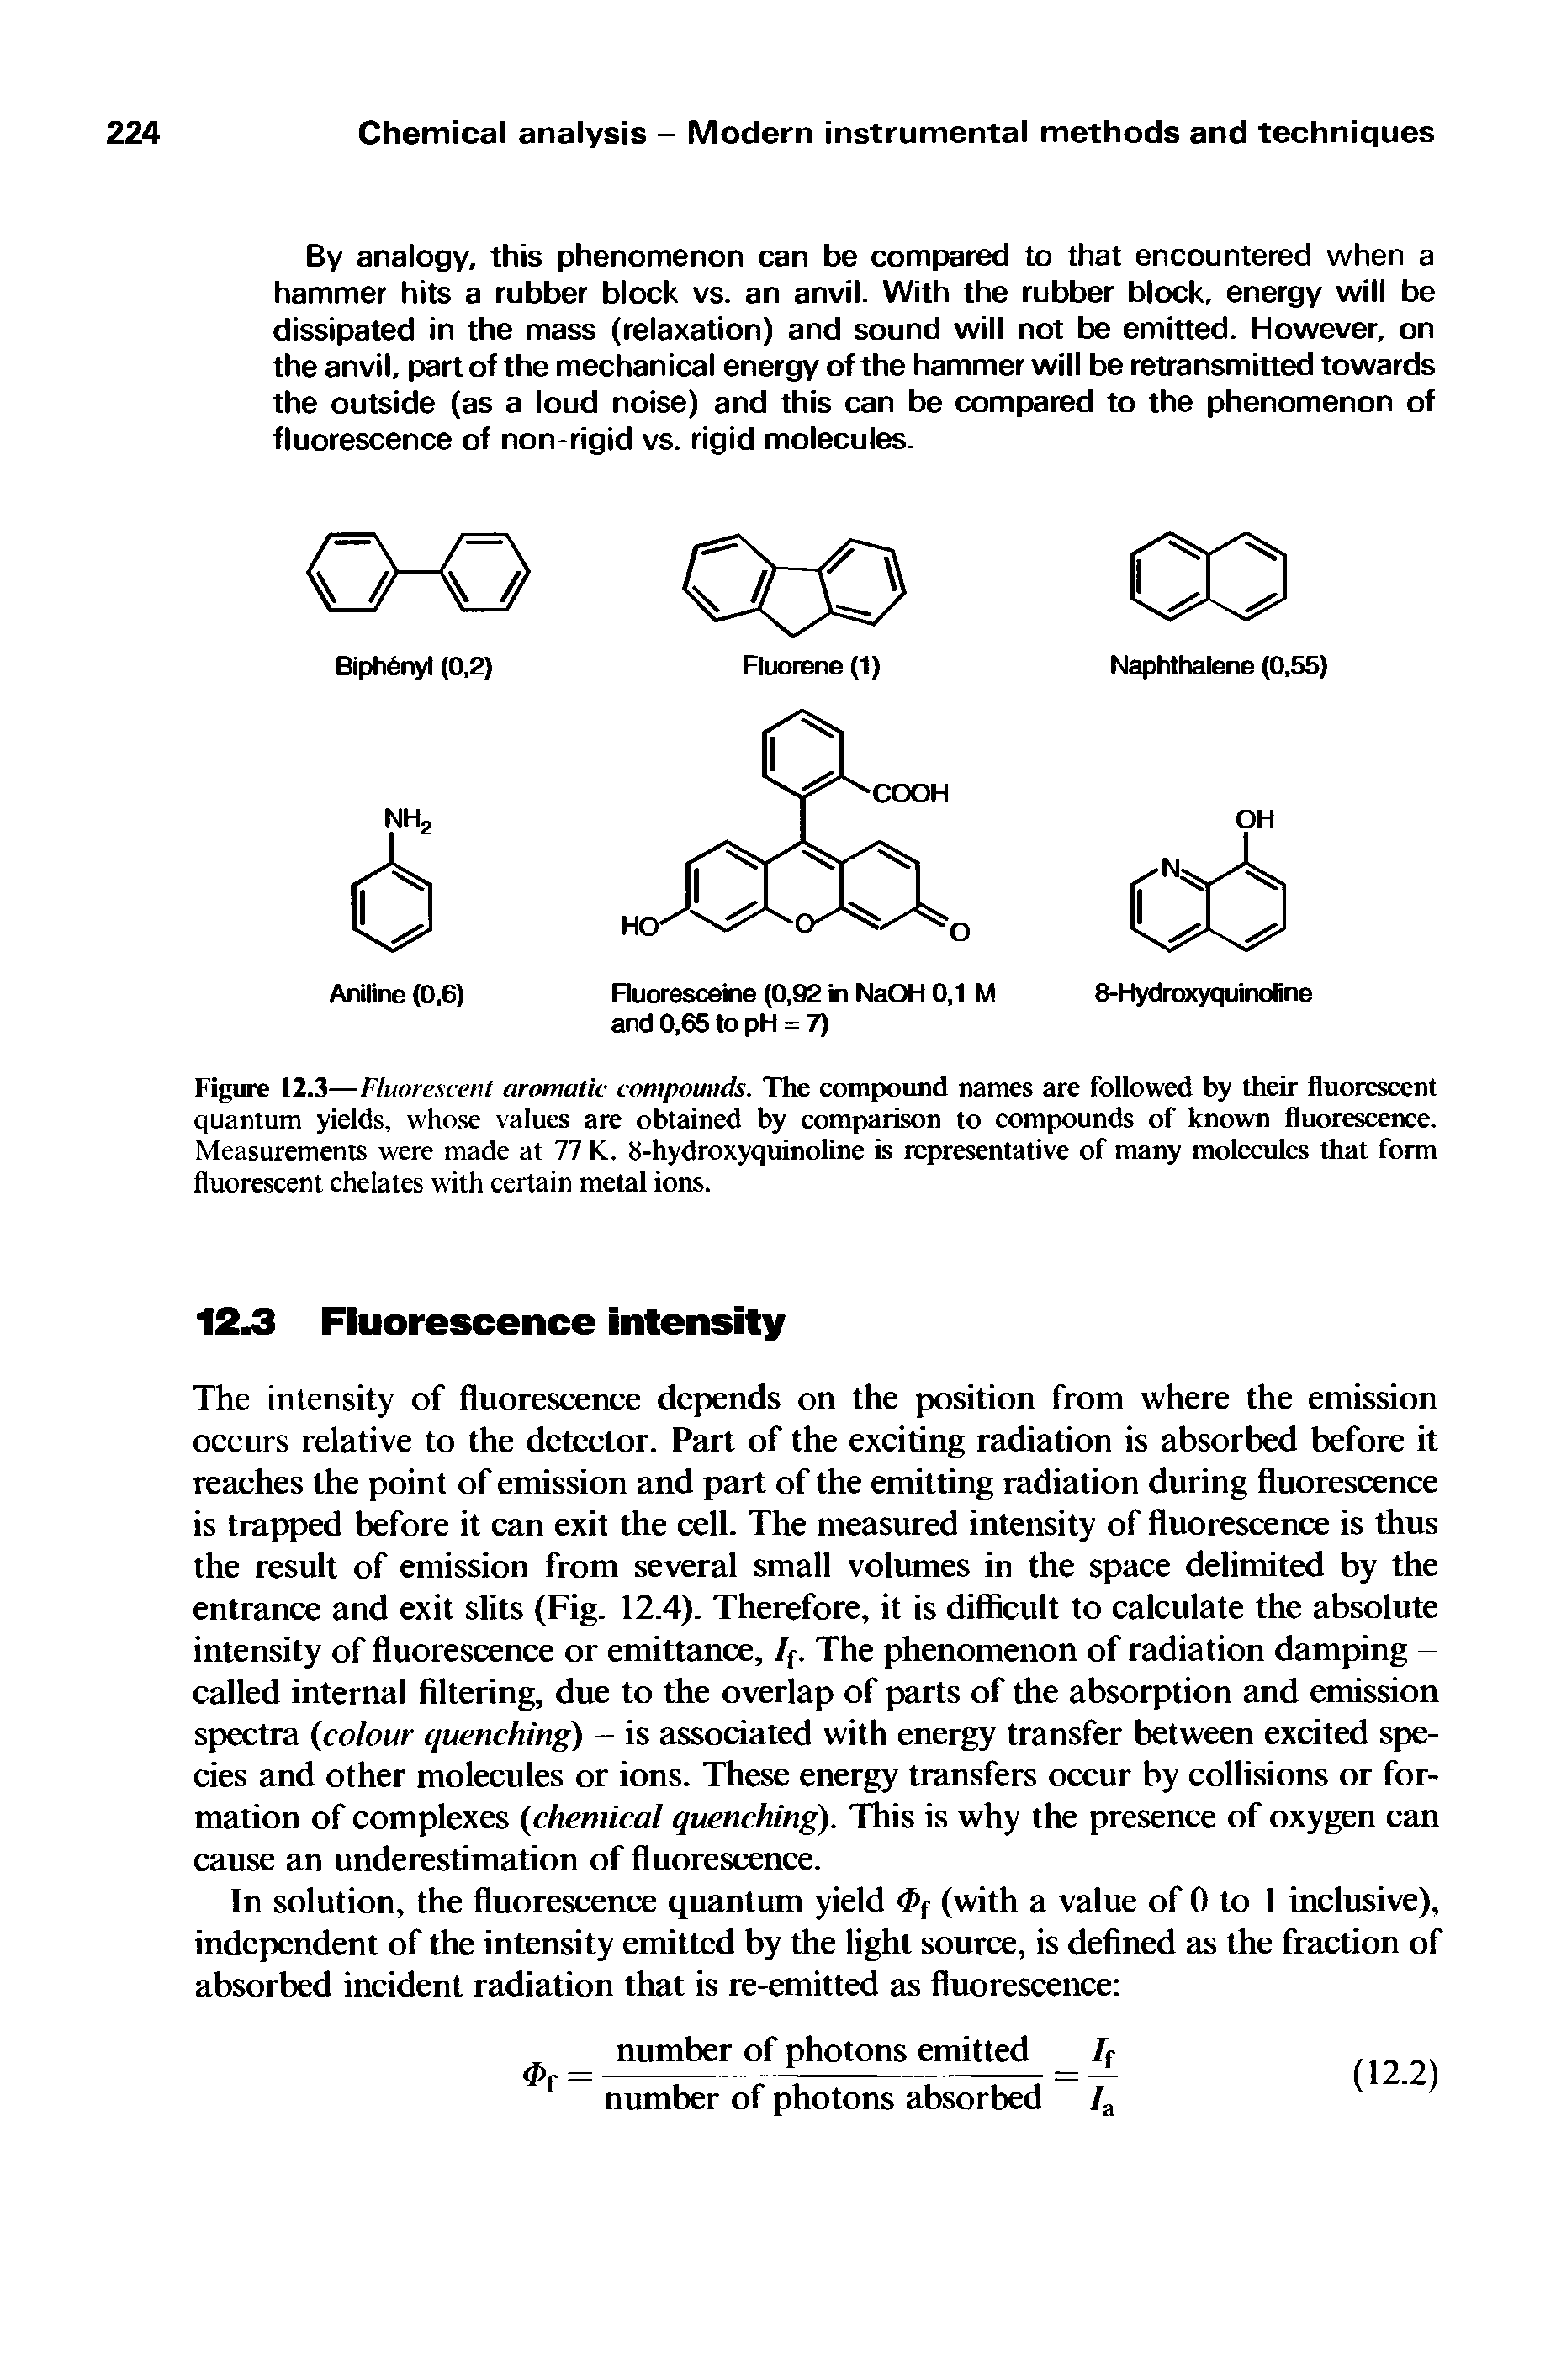 Figure 12.3—Fluorescent aromatic compounds. The compound names are followed by their fluorescent quantum yields, whose values are obtained by comparison to compounds of known fluorescence. Measurements were made at 77 K. 8-hydroxyquinoline is representative of many molecules that form fluorescent chelates with certain metal ions.